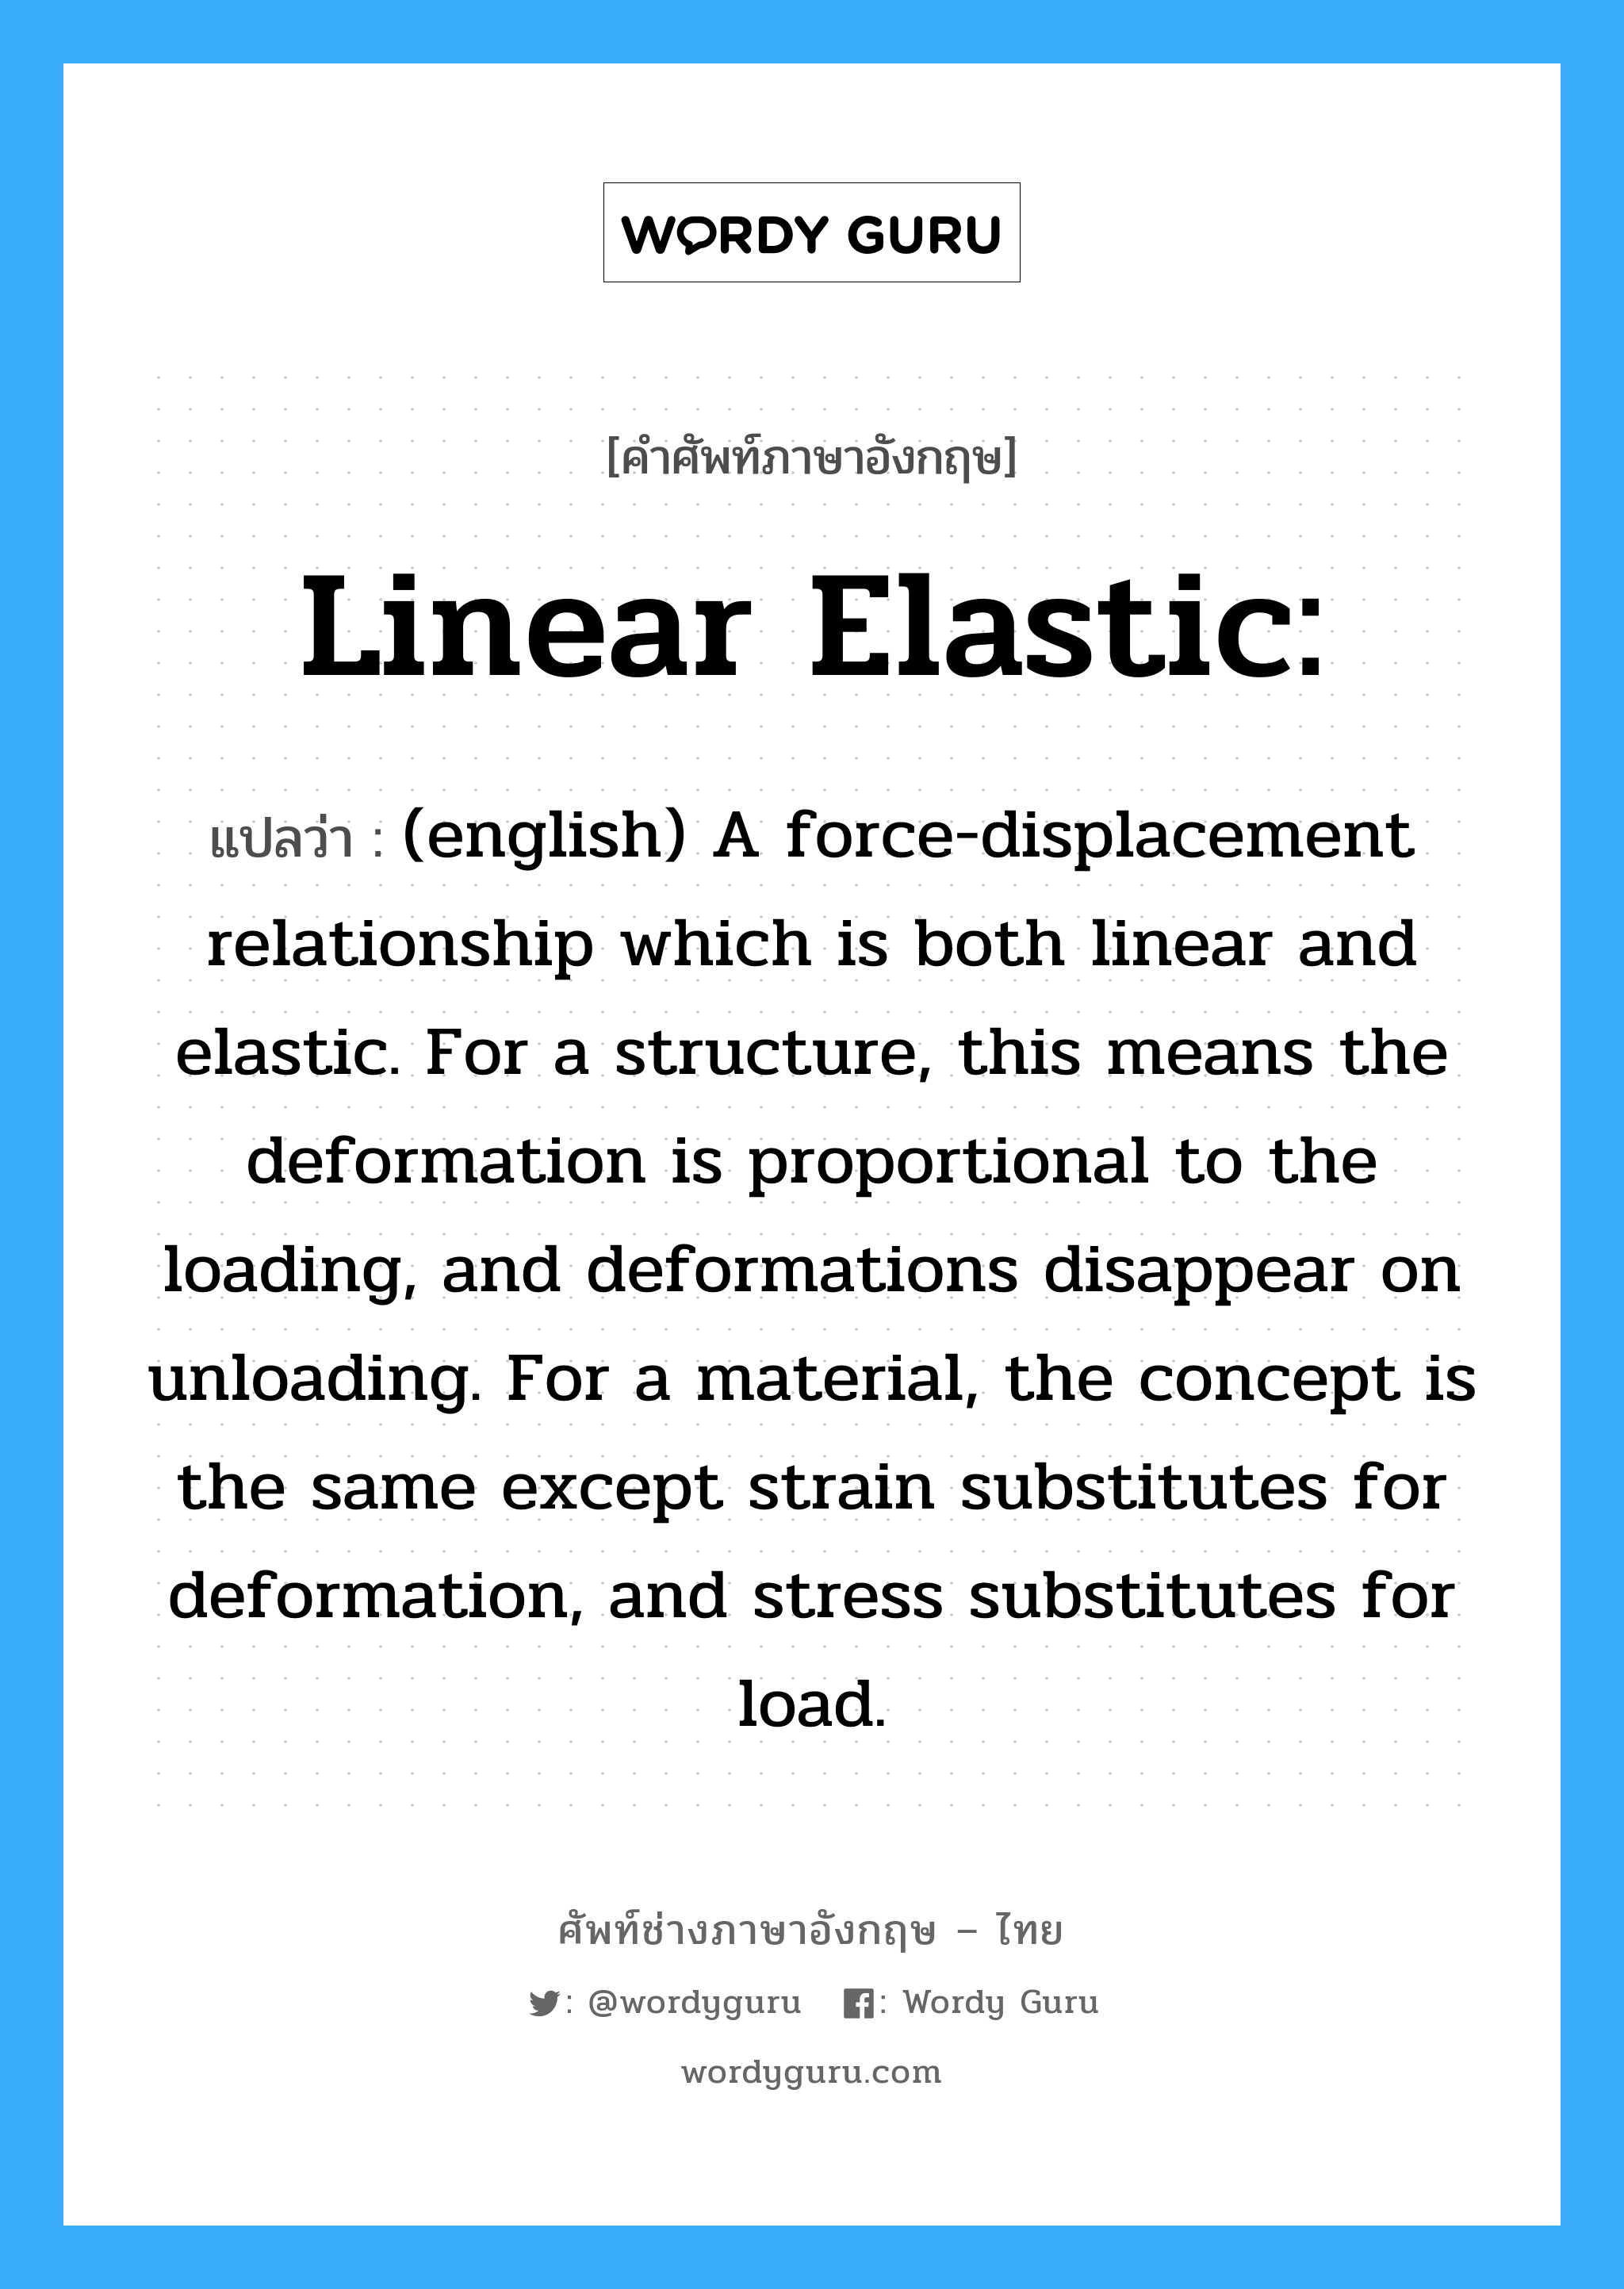 (english) A force-displacement relationship which is both linear and elastic. For a structure, this means the deformation is proportional to the loading, and deformations disappear on unloading. For a material, the concept is the same except strain substitutes for deformation, and stress substitutes for load. ภาษาอังกฤษ?, คำศัพท์ช่างภาษาอังกฤษ - ไทย (english) A force-displacement relationship which is both linear and elastic. For a structure, this means the deformation is proportional to the loading, and deformations disappear on unloading. For a material, the concept is the same except strain substitutes for deformation, and stress substitutes for load. คำศัพท์ภาษาอังกฤษ (english) A force-displacement relationship which is both linear and elastic. For a structure, this means the deformation is proportional to the loading, and deformations disappear on unloading. For a material, the concept is the same except strain substitutes for deformation, and stress substitutes for load. แปลว่า Linear Elastic: